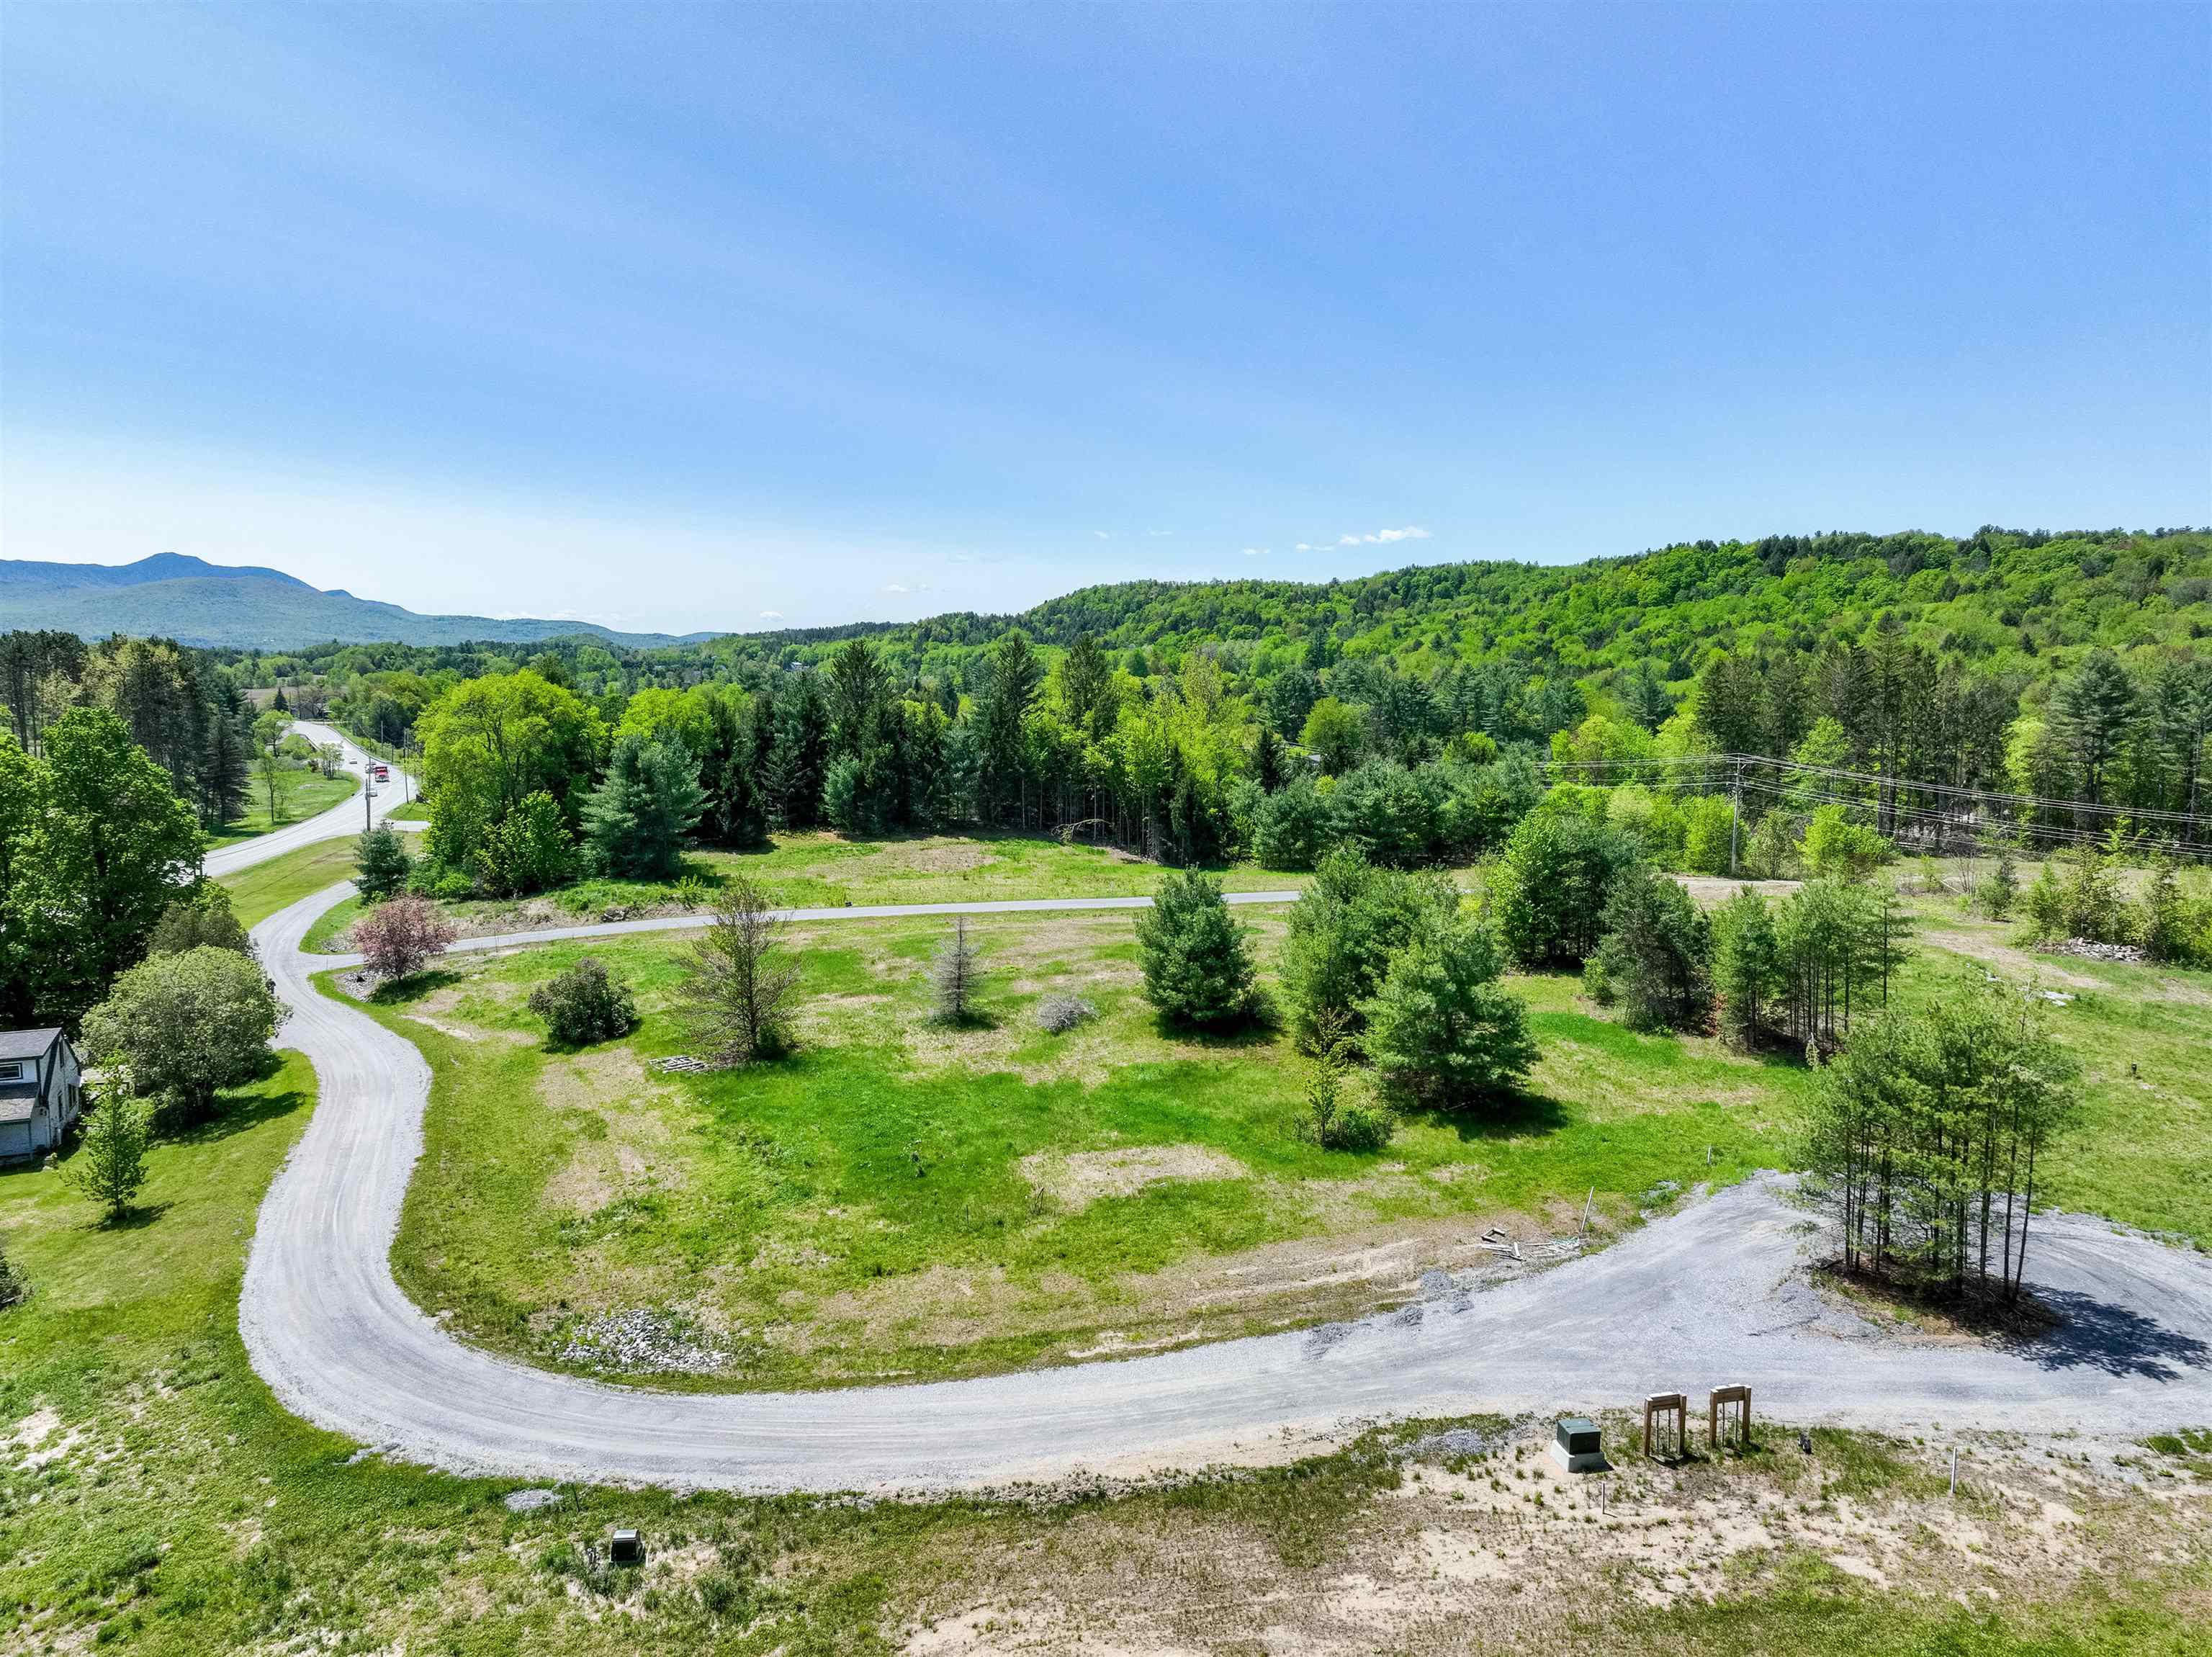 near 4233 -Lot4 Stagecoach Road Morristown, VT 05661 Property 2